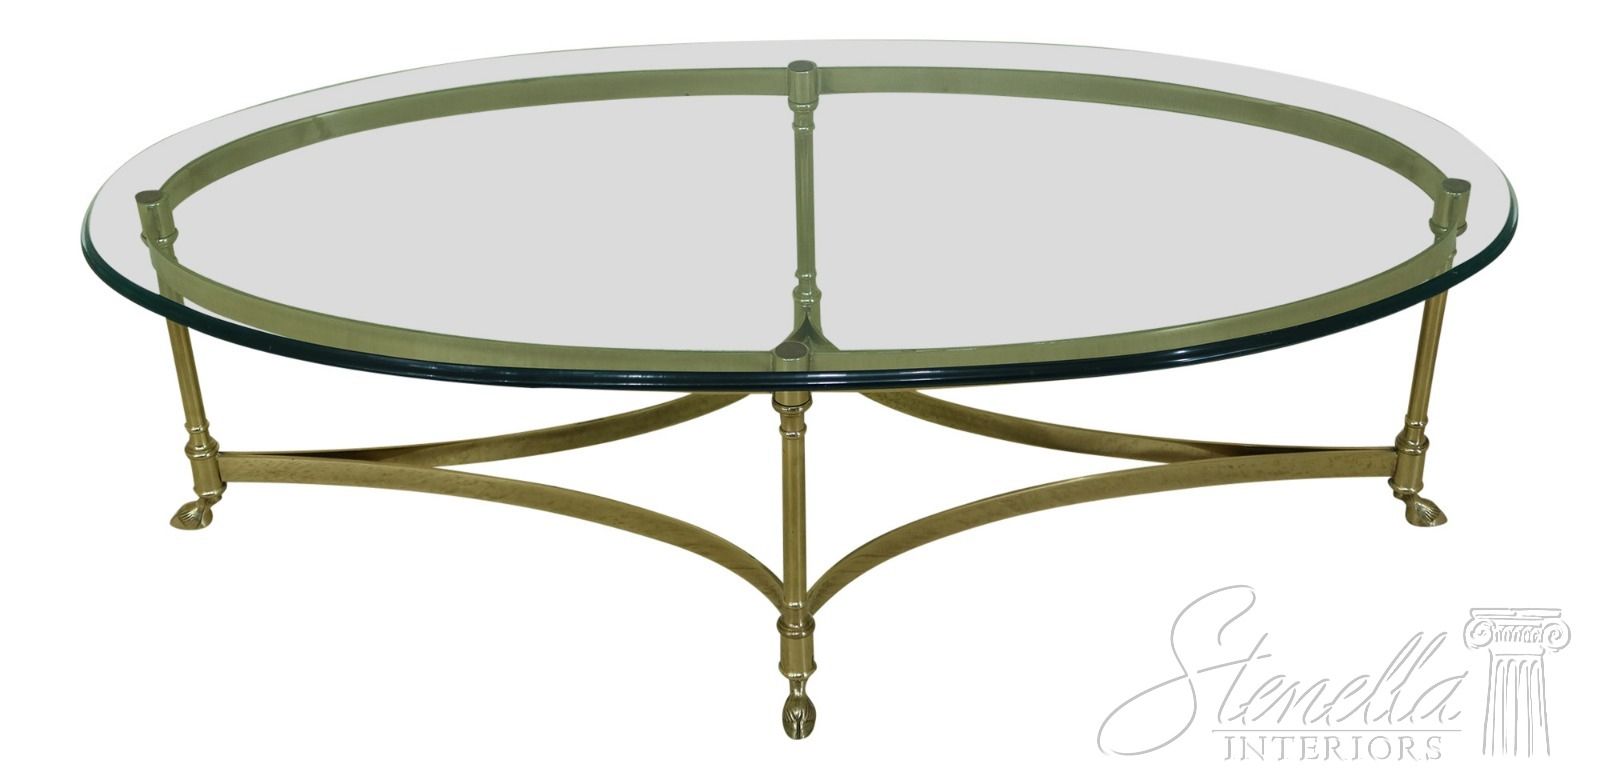 32017ec: Labarge Oval Brass & Glass Regency Coffee Table | Ebay Throughout Glass And Gold Oval Console Tables (View 7 of 20)